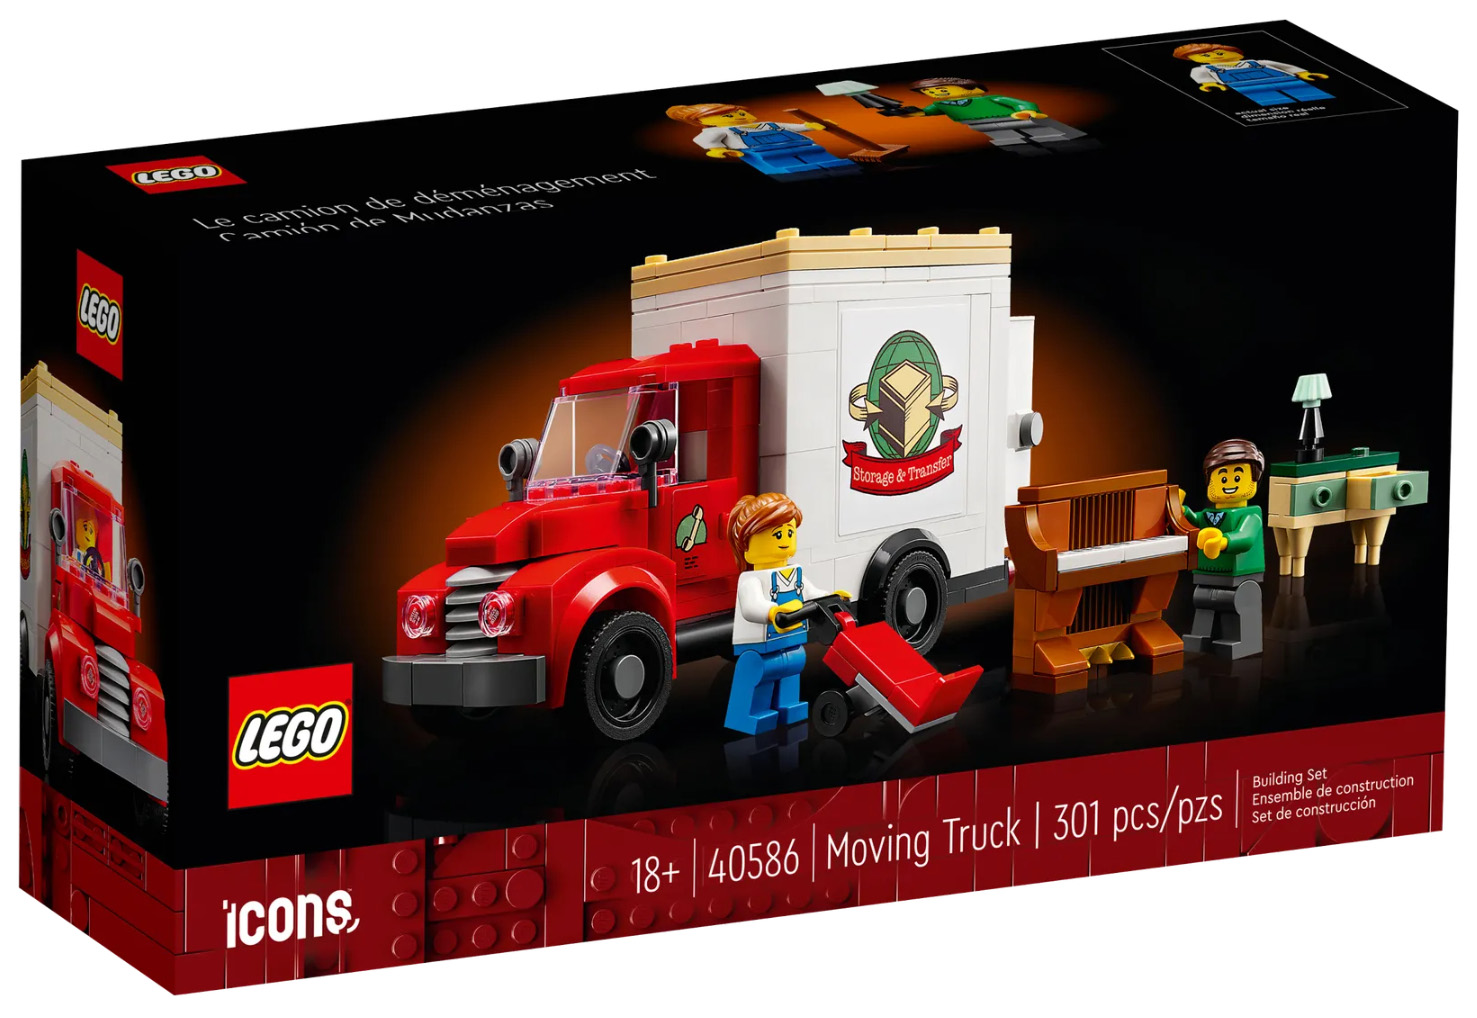 40586 Moving Truck GWP Available at LEGO(R)Shop Official Store in US, Canada and Australia